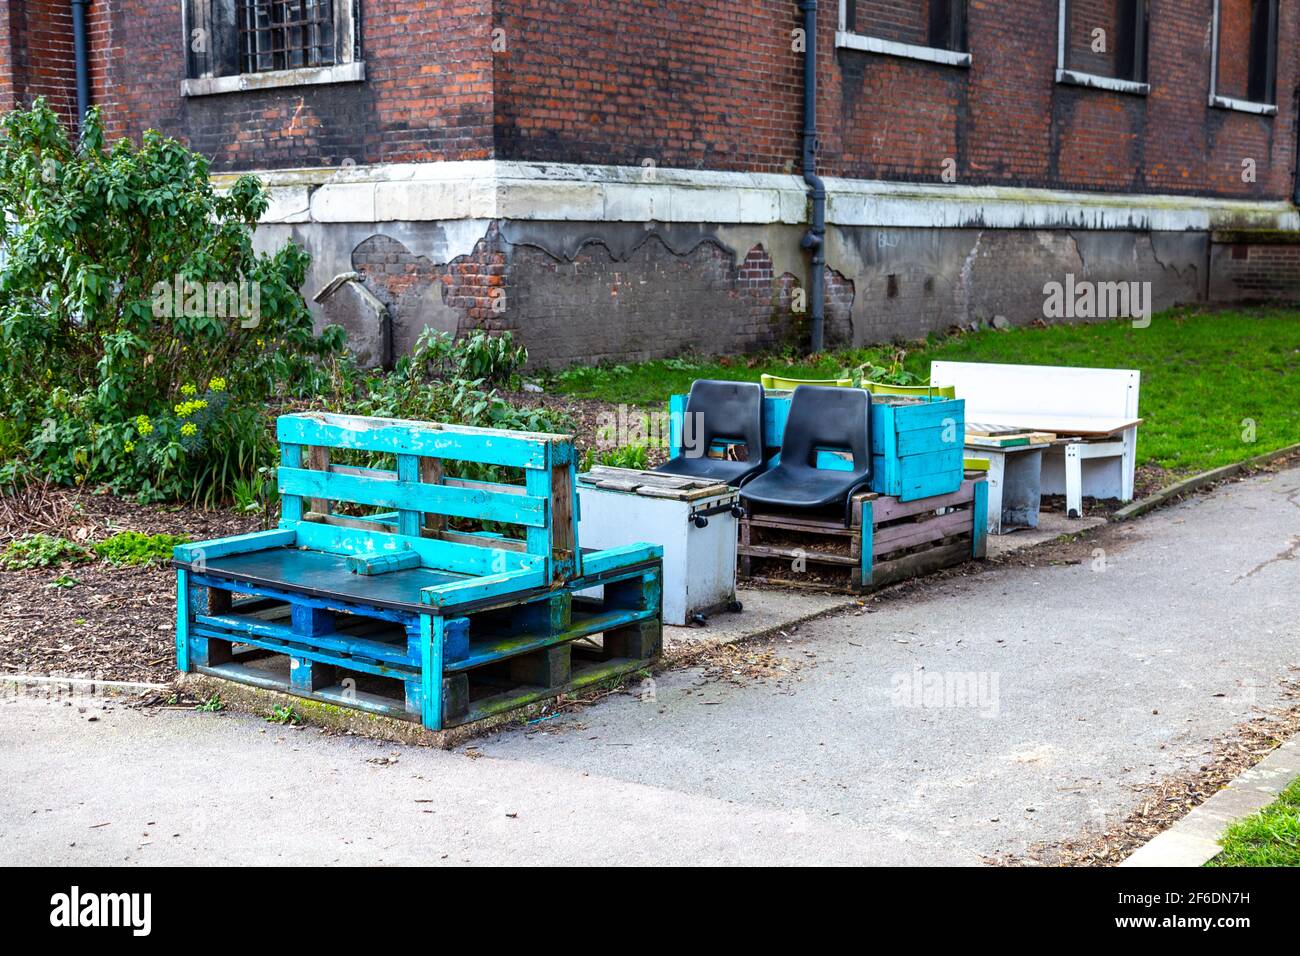 Benches made from reclaimed materials in the gardens of Shoreditch Church (St. Leonard's Shoreditch), London, UK Stock Photo